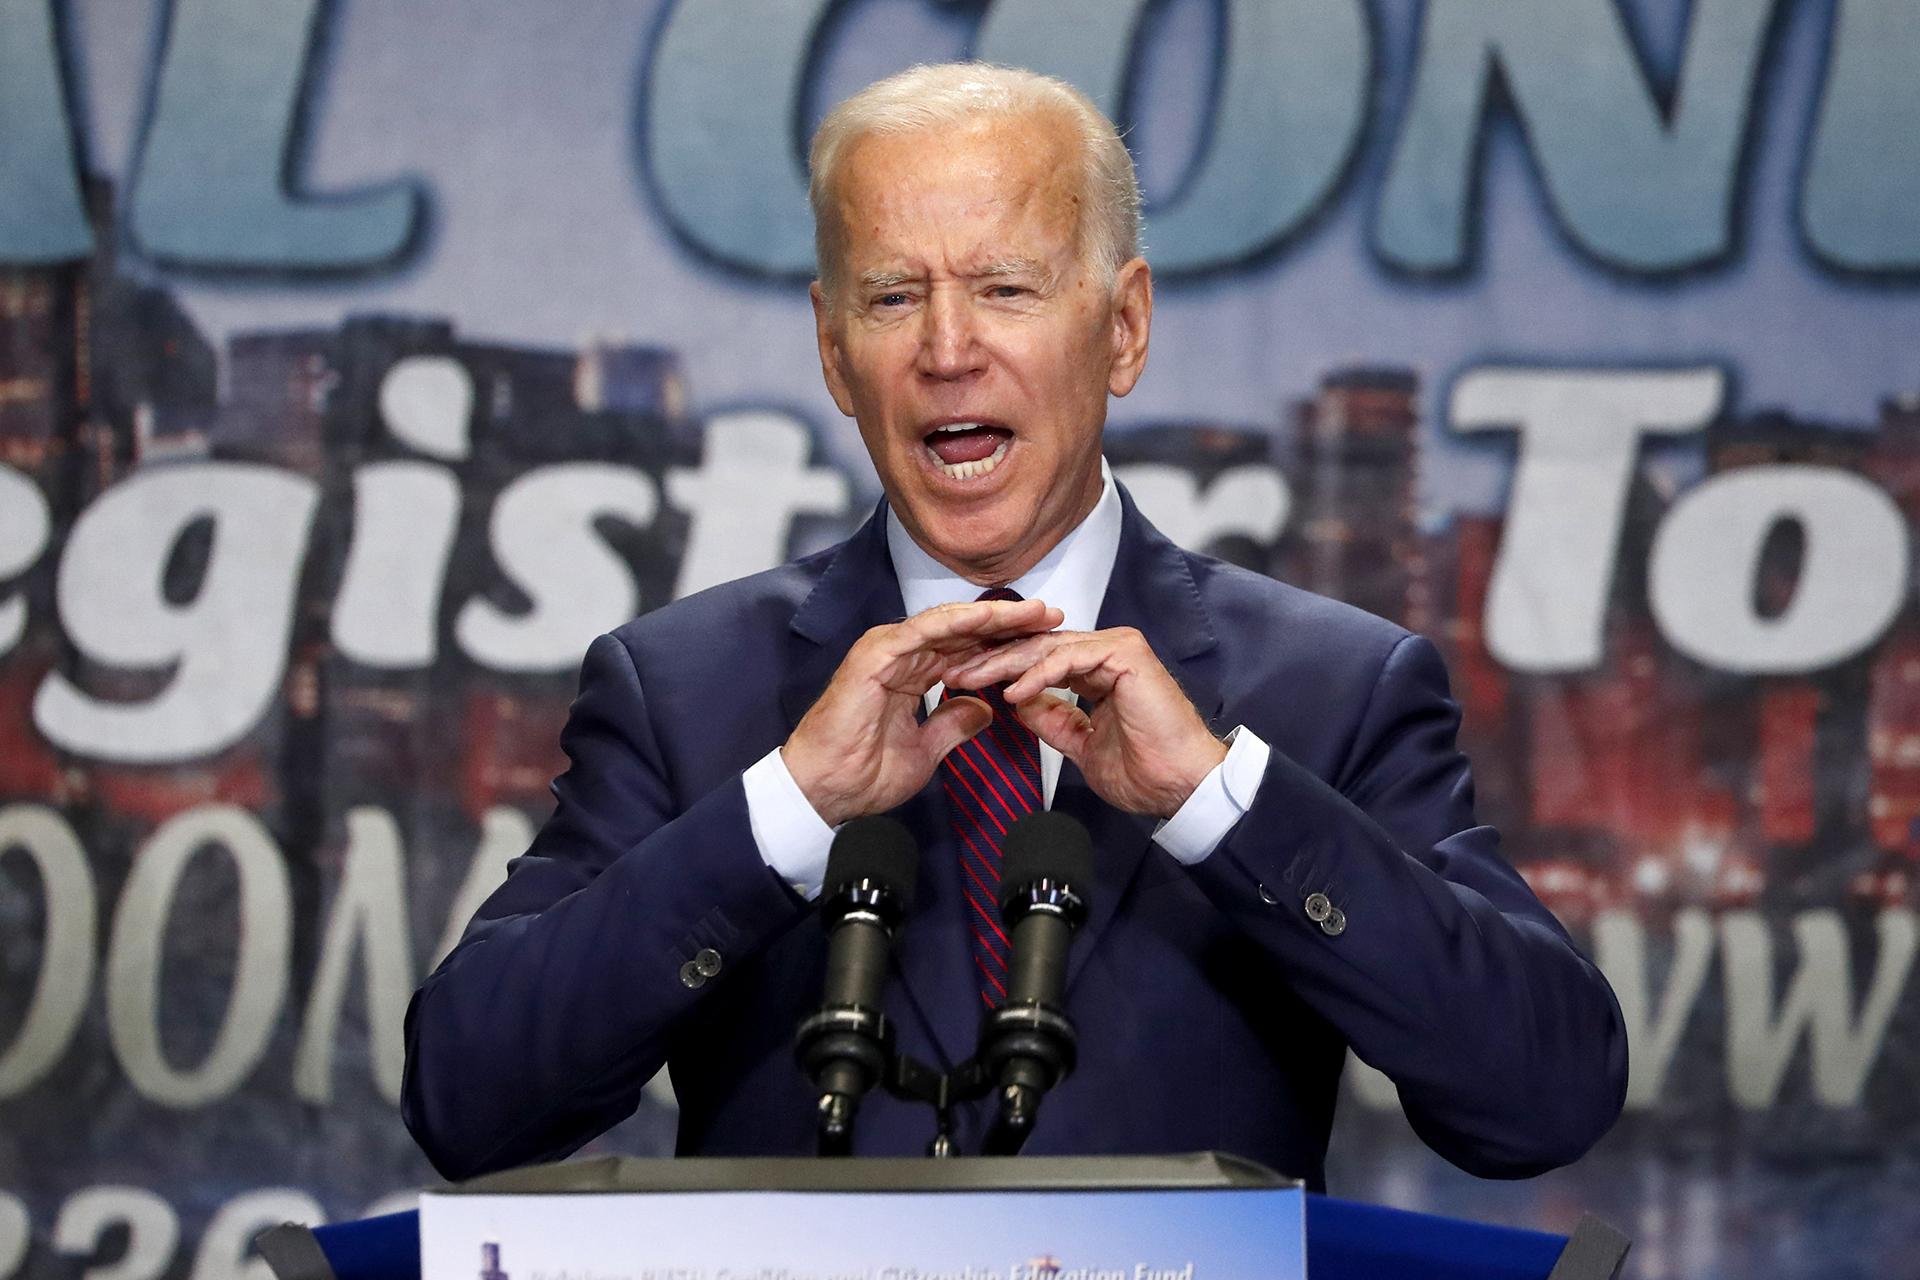 Democratic presidential candidate former Vice President Joe Biden addresses the Rainbow PUSH Coalition Annual International Convention Friday, June 28, 2019, in Chicago. (AP Photo / Charles Rex Arbogast)